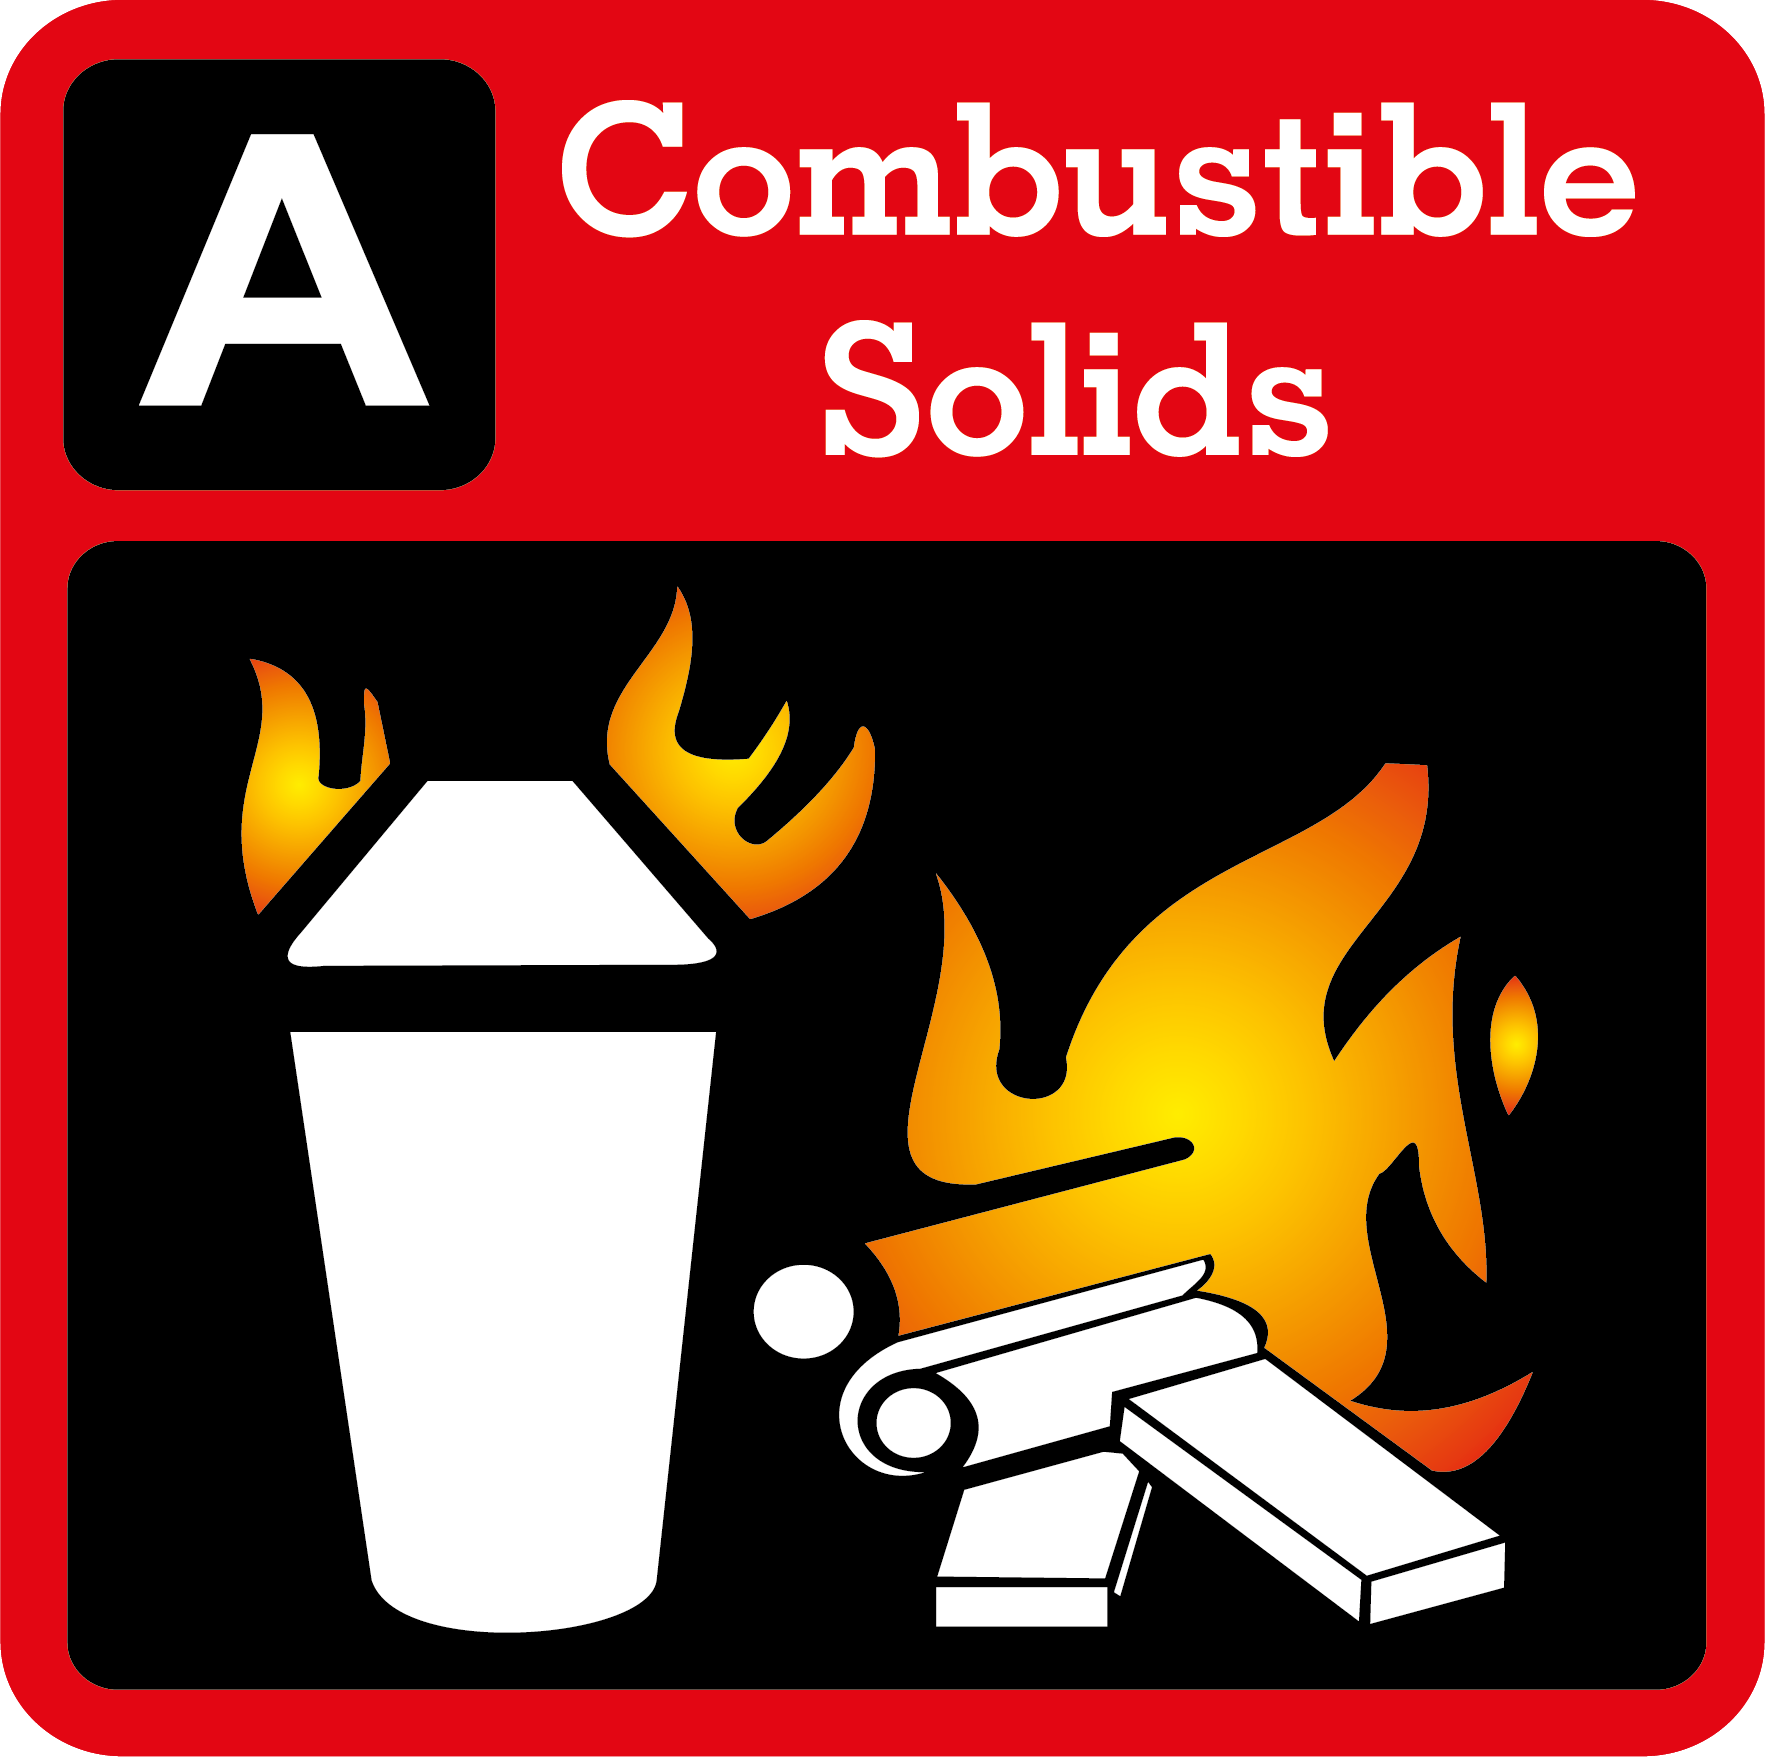 A Combustible Solids